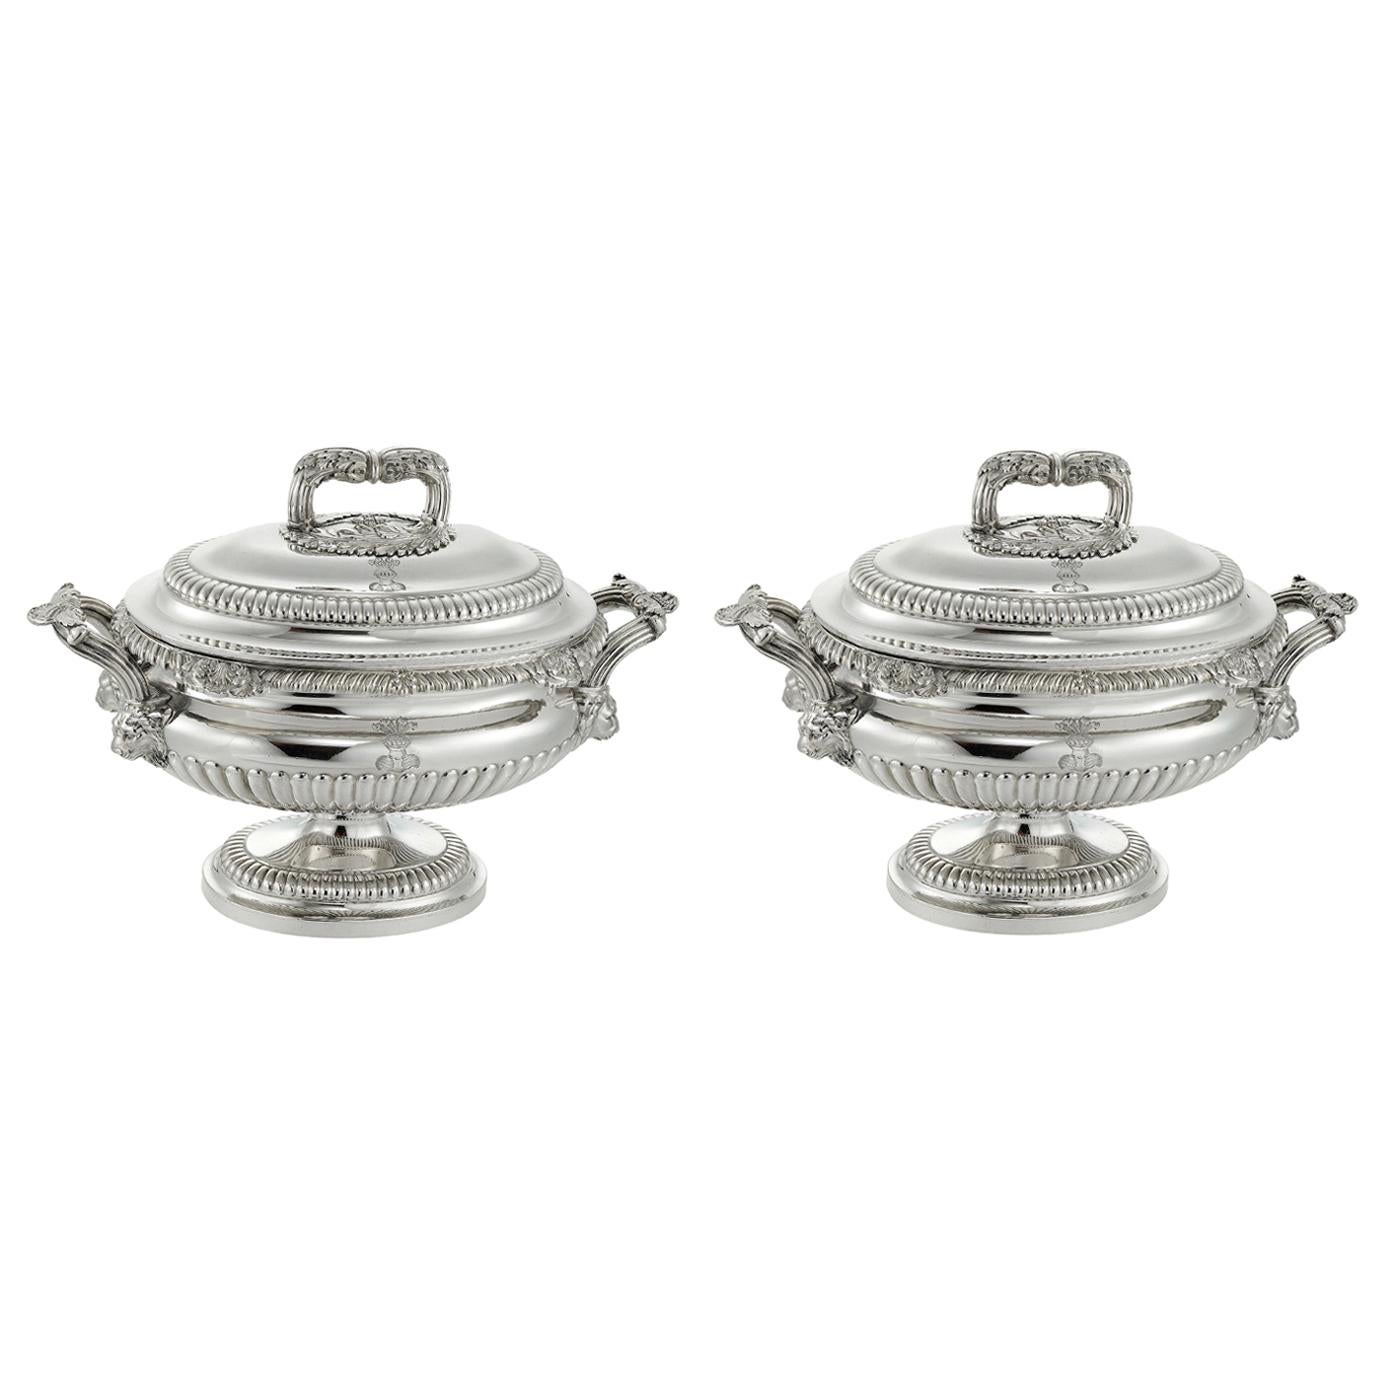 Pair of Silver Sauce-Boats